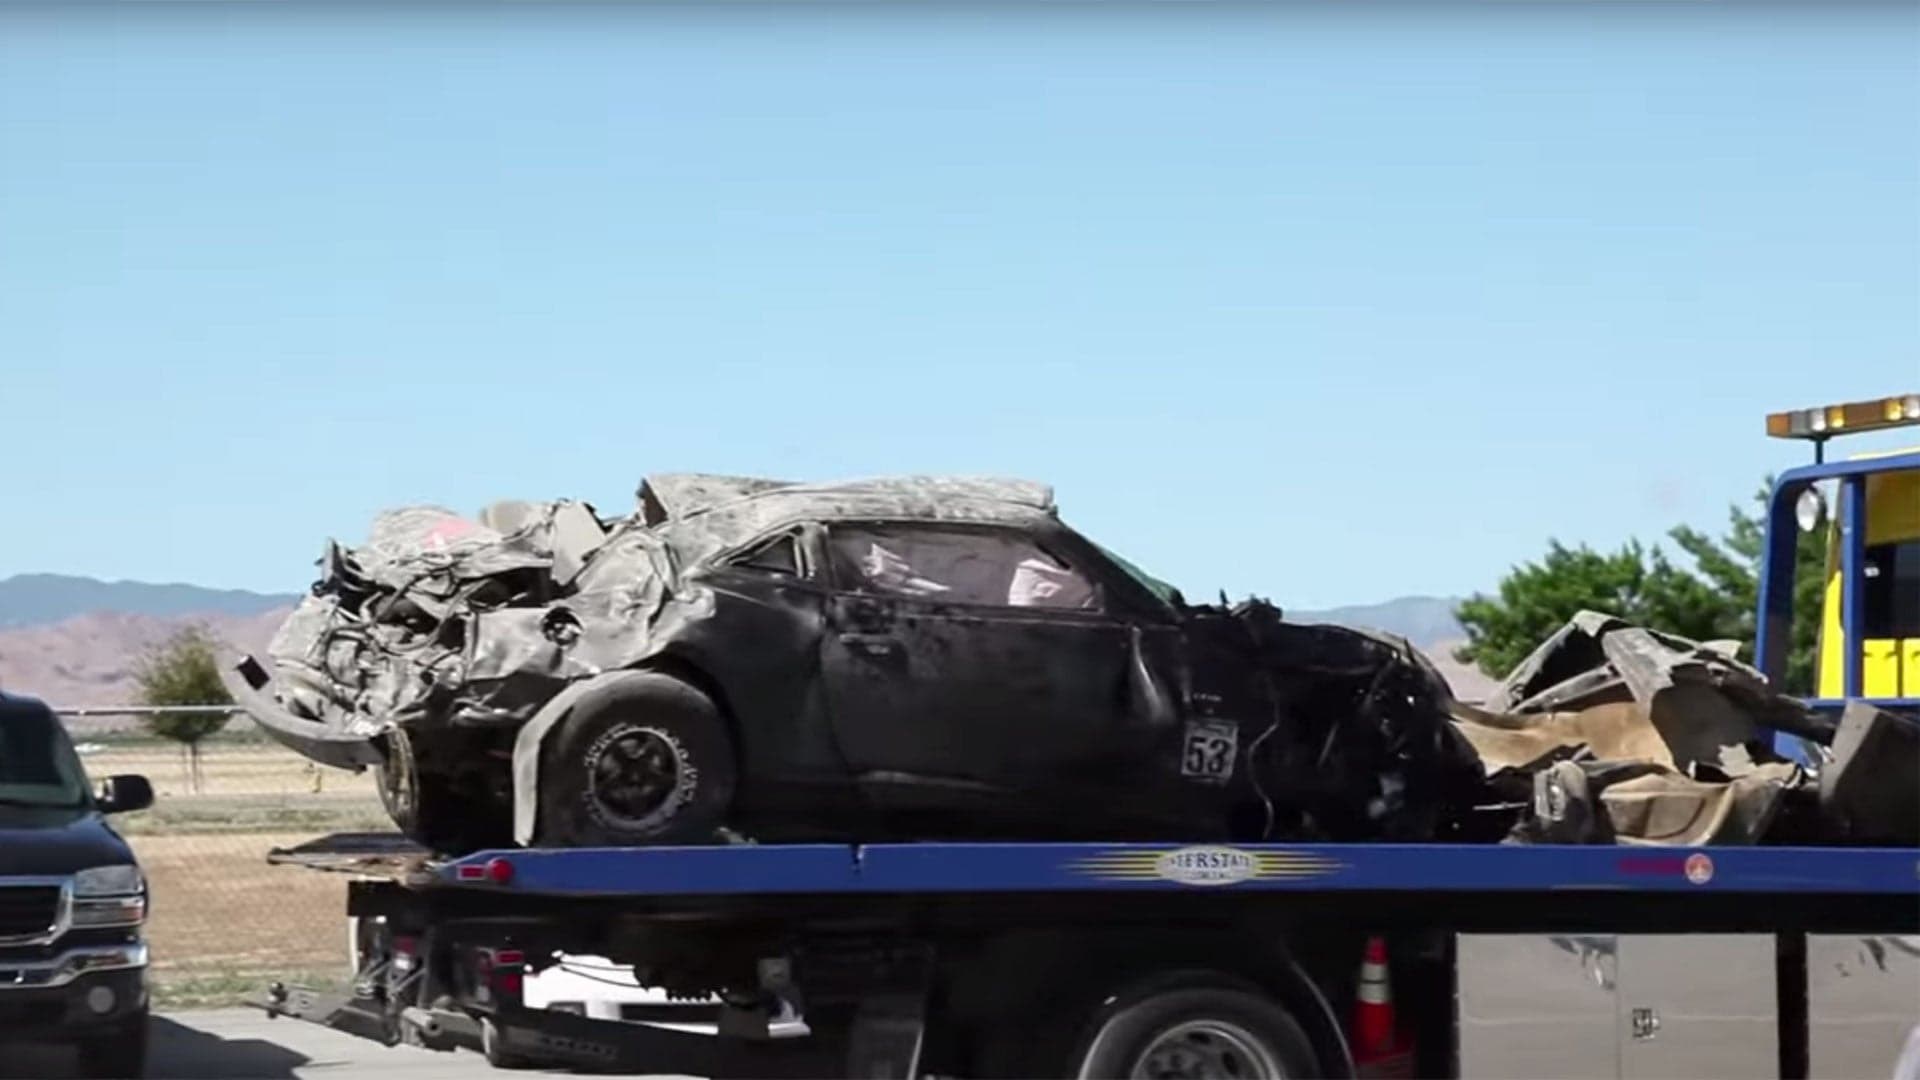 Watch This 1,800-HP Chevrolet Camaro Crash at Almost 200 MPH